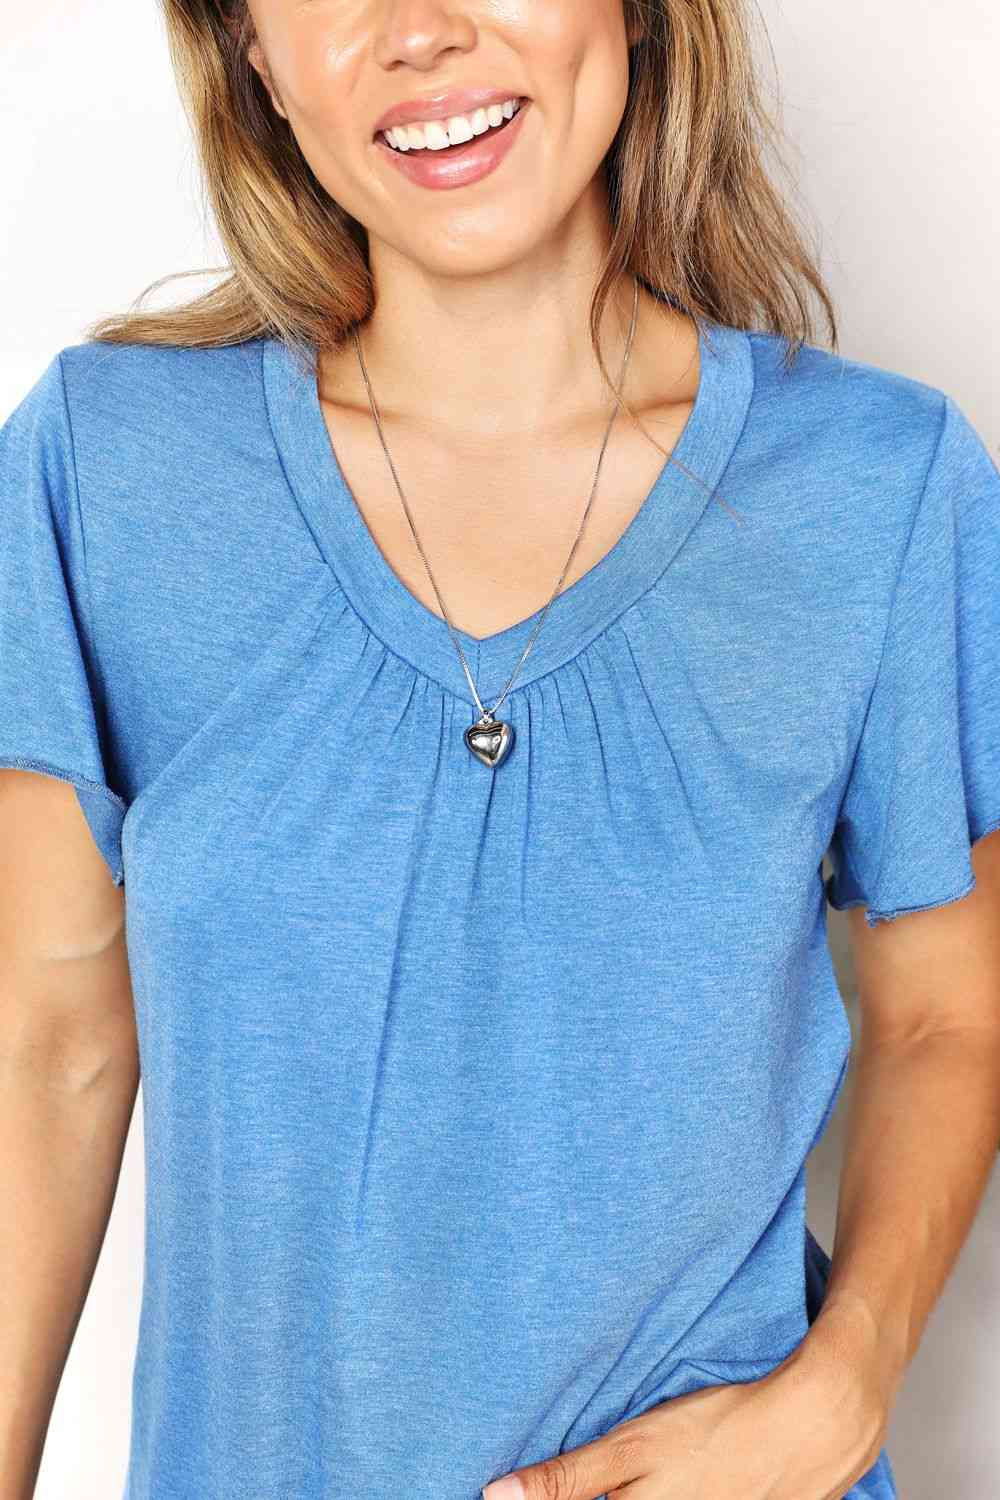 a woman wearing a blue shirt and a necklace